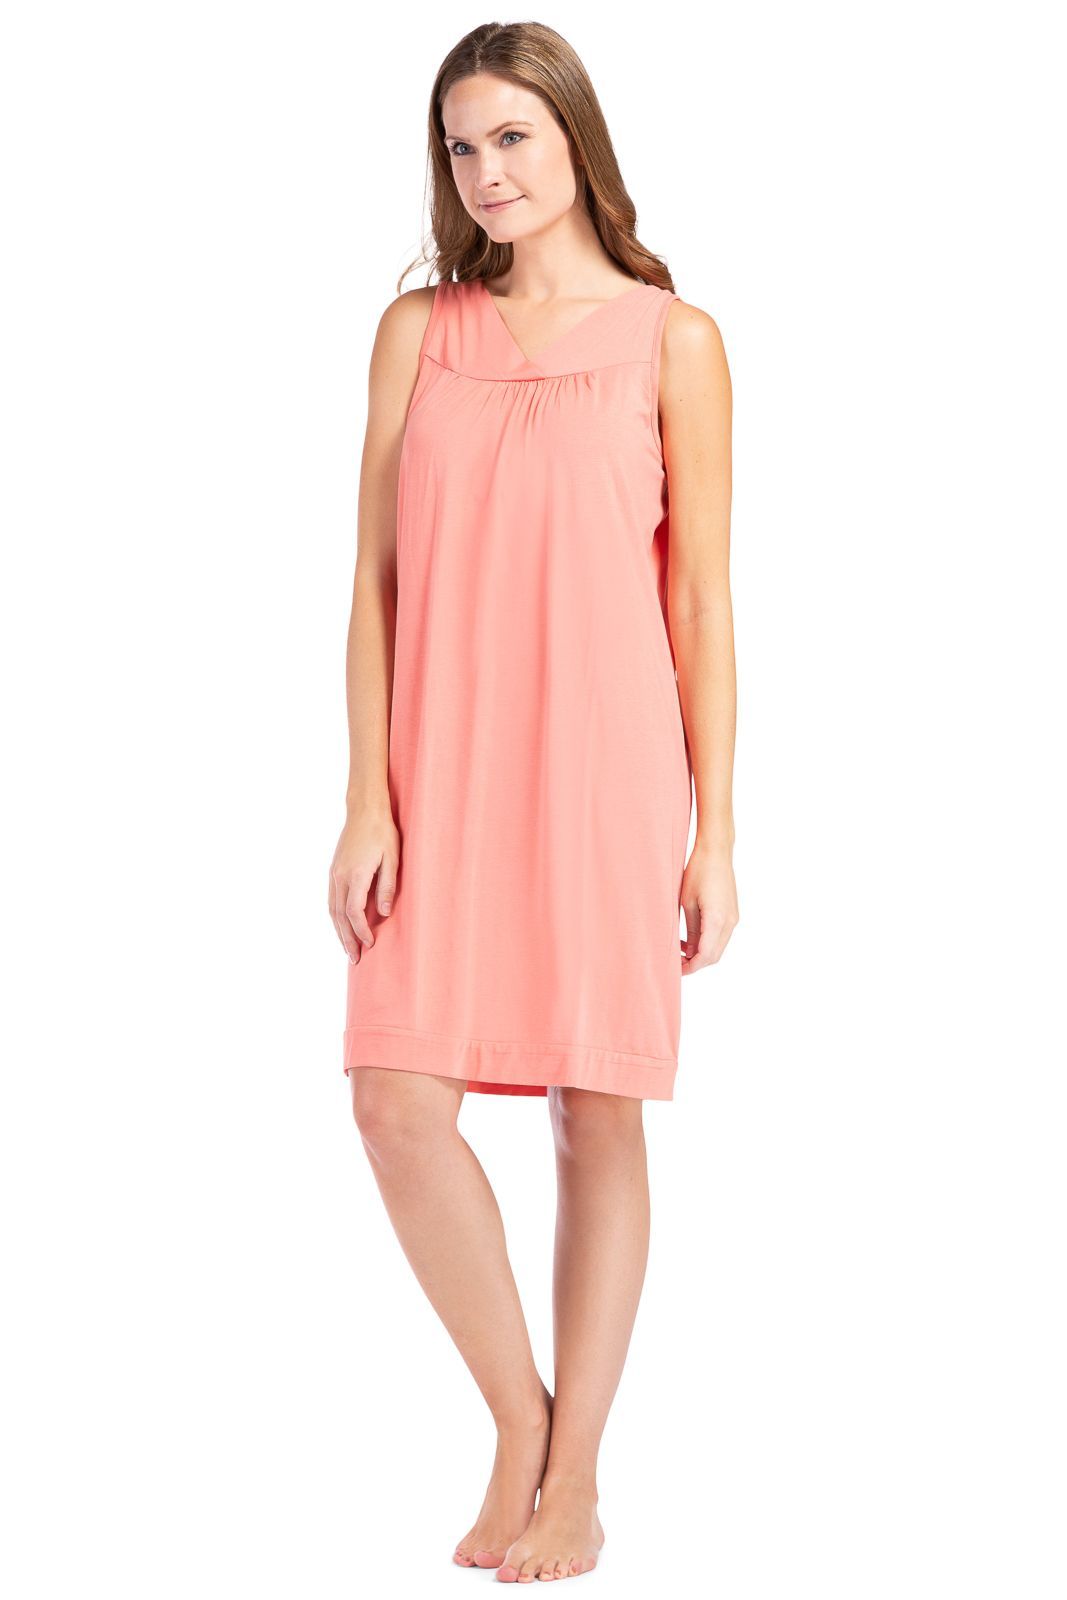 Women's Sleeveless EcoFabric™ Nightgown - Relaxed Fit Womens>Sleepwear>Nightgown Fishers Finery Coral X-Small 